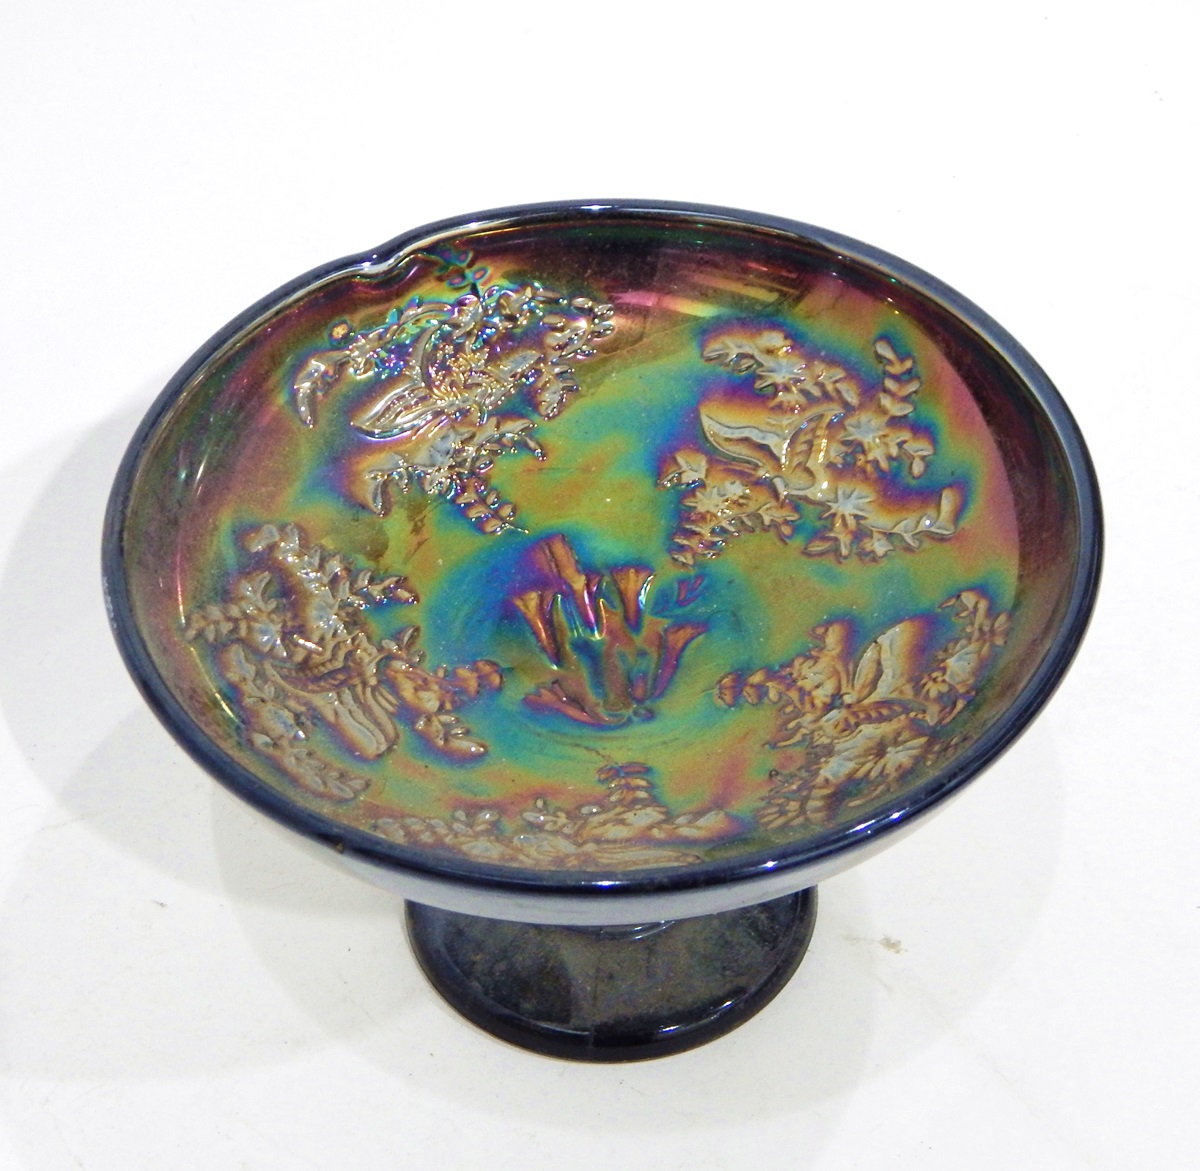 Carnival glass pedestal bowl decorated in the 'Butterfly Bush' pattern, 24cm diameter, - Image 2 of 5